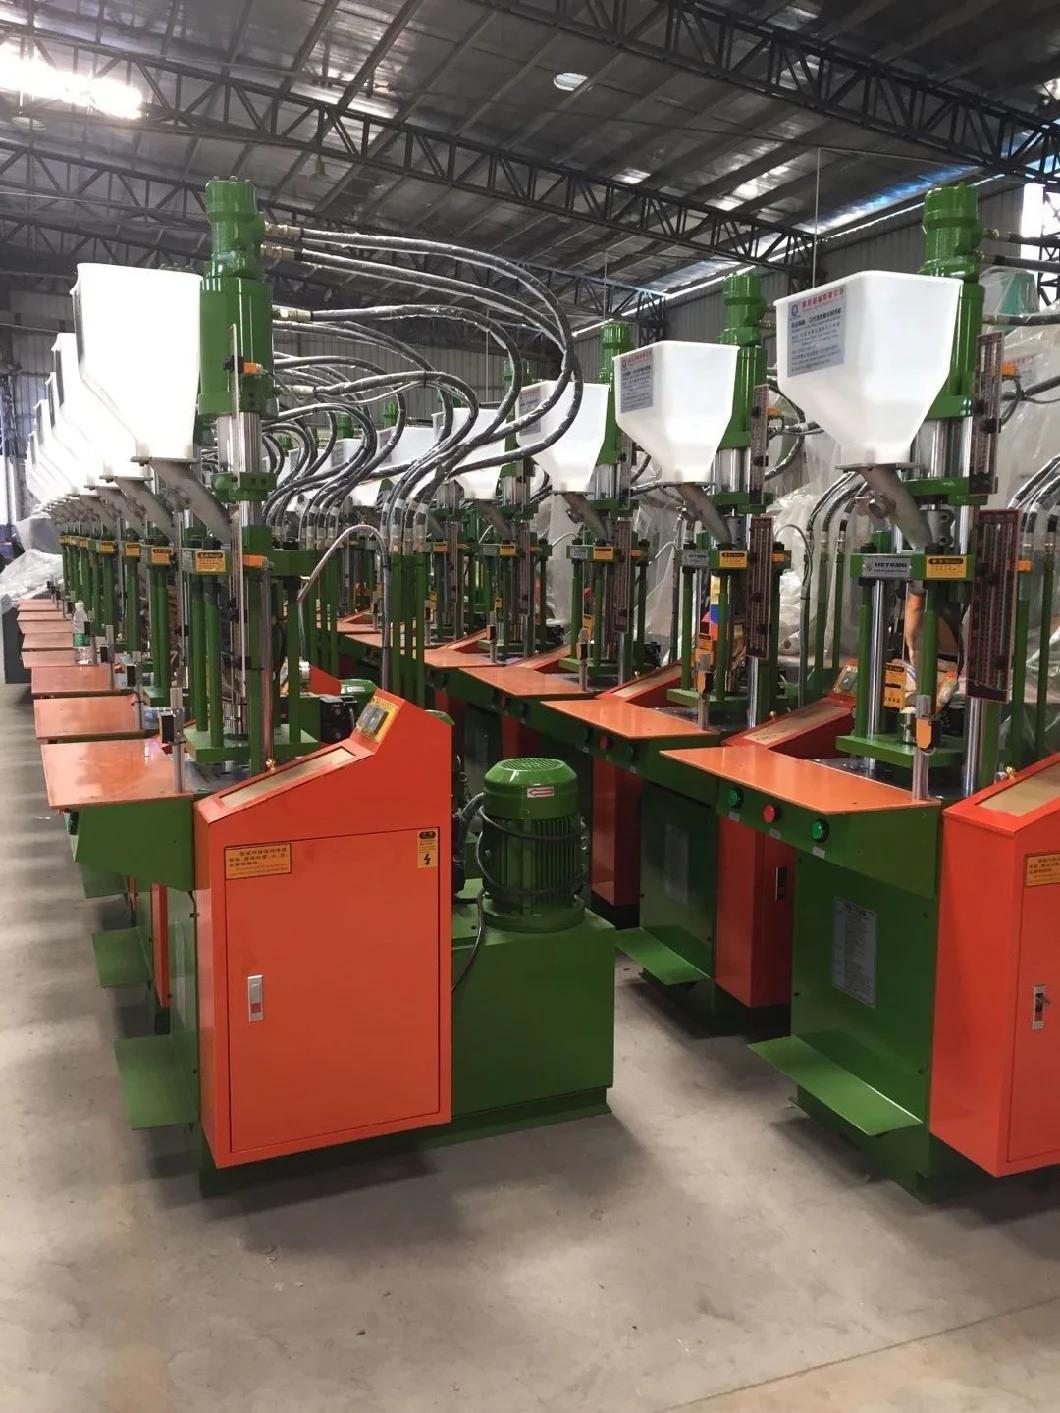 Rotary Table Vertical Plastic Injection Molding Machine